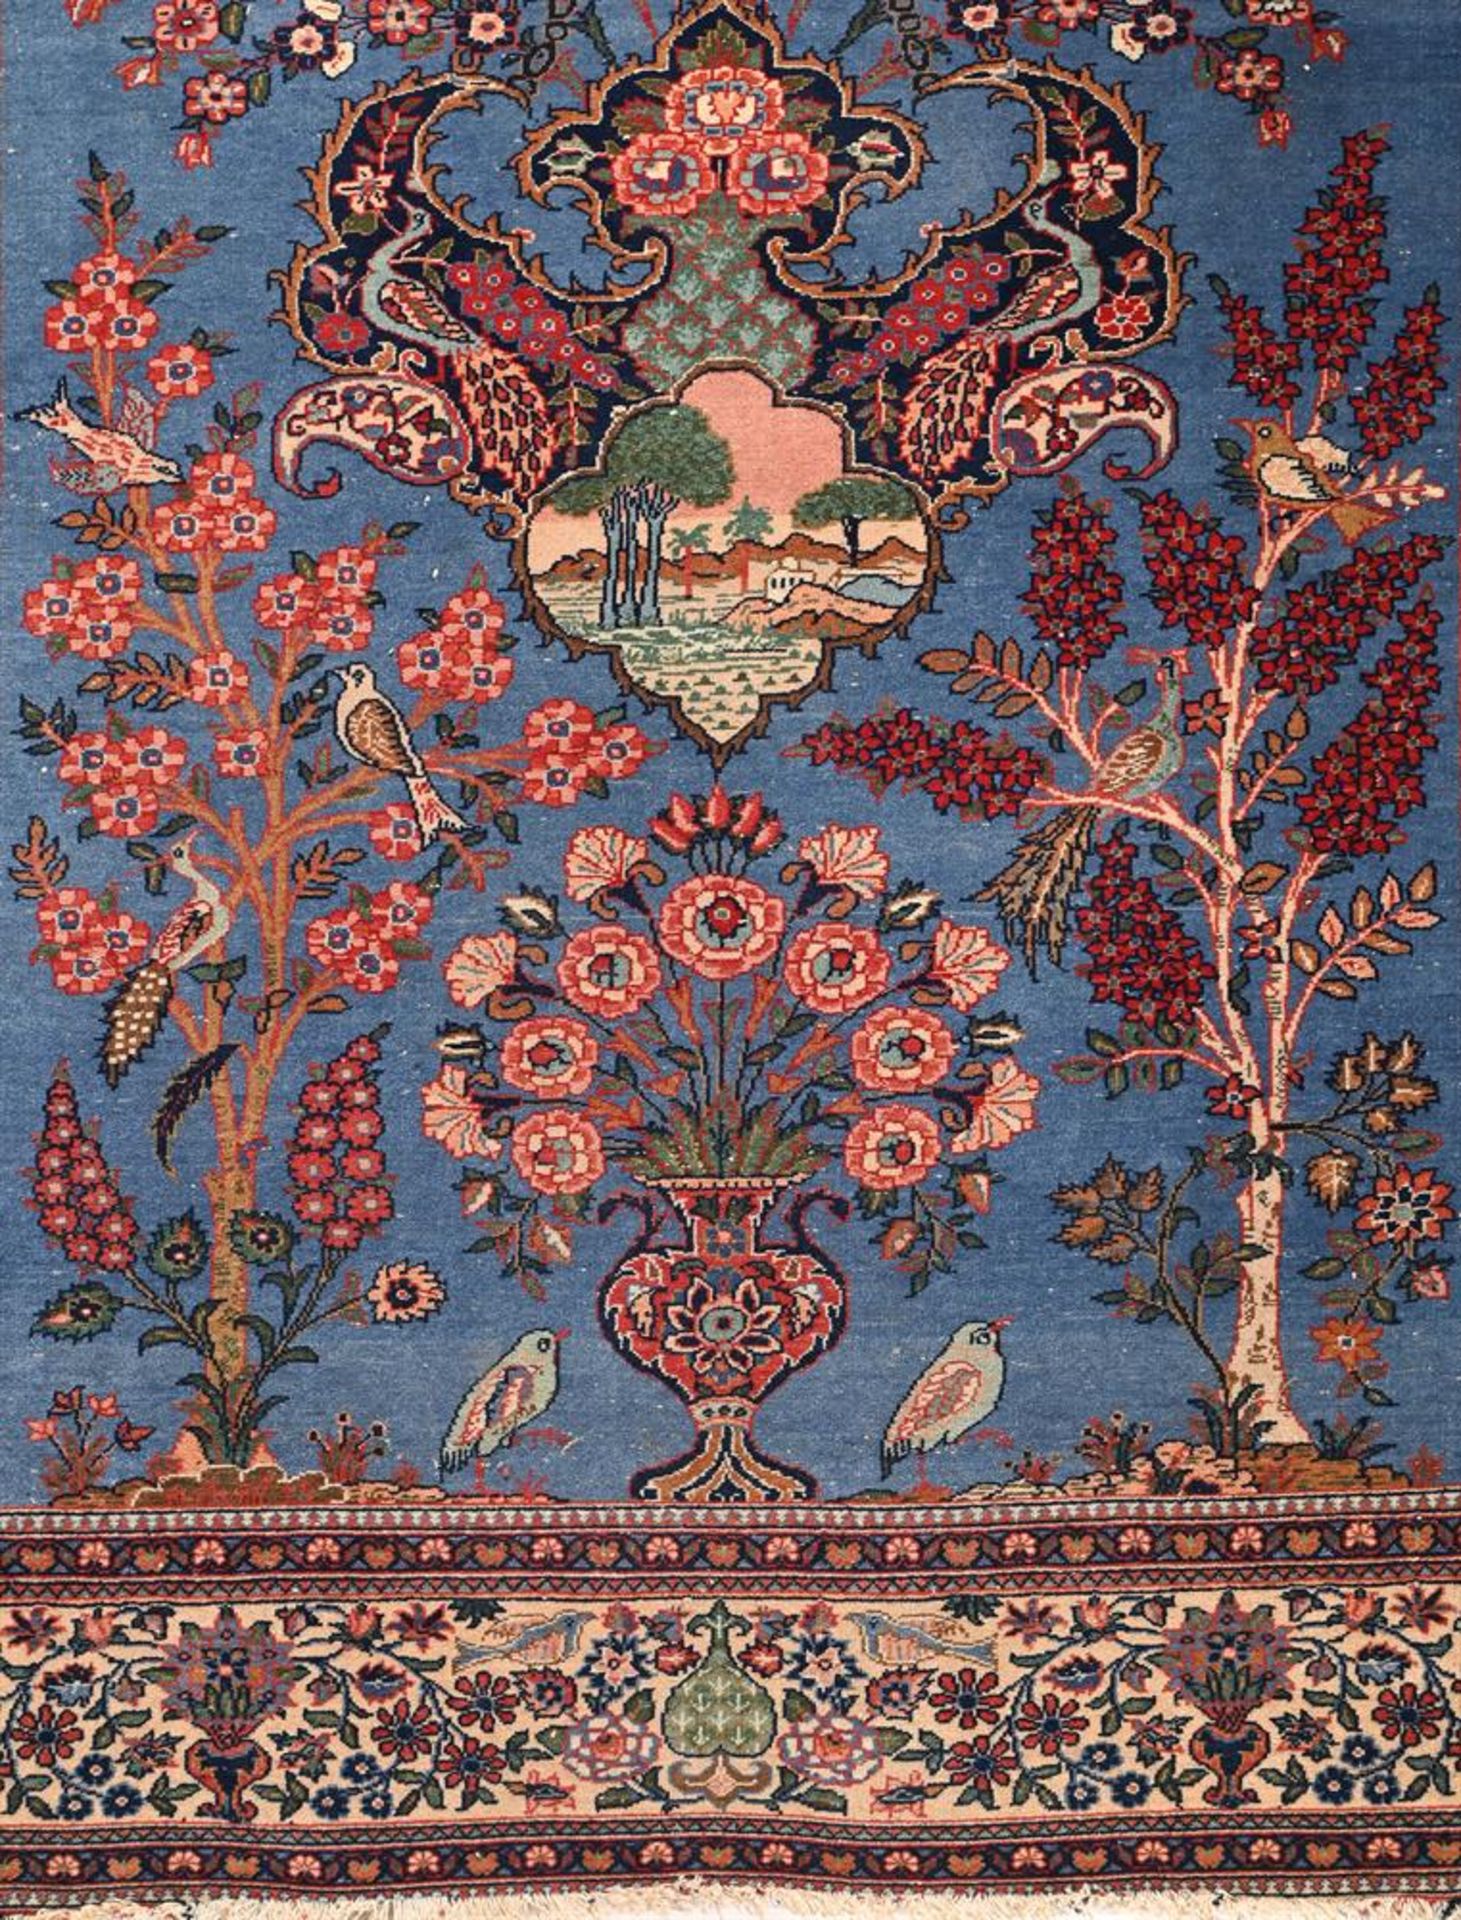 A PAIR OF PERSIAN RUGS, PROBABLY QUM - Image 5 of 5